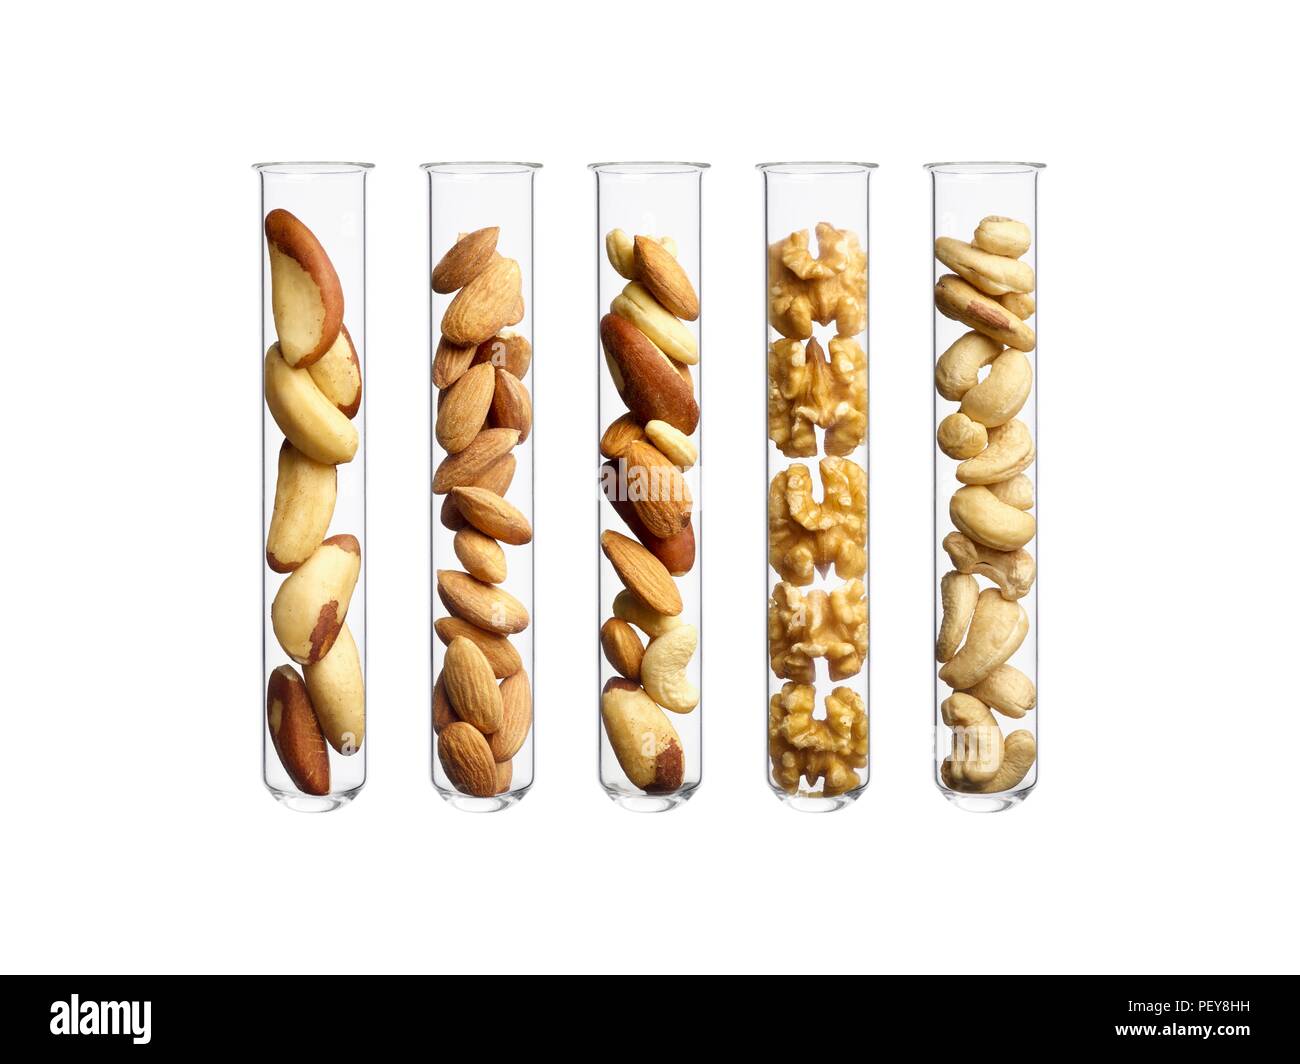 Nuts in test tubes, studio shot. Stock Photo